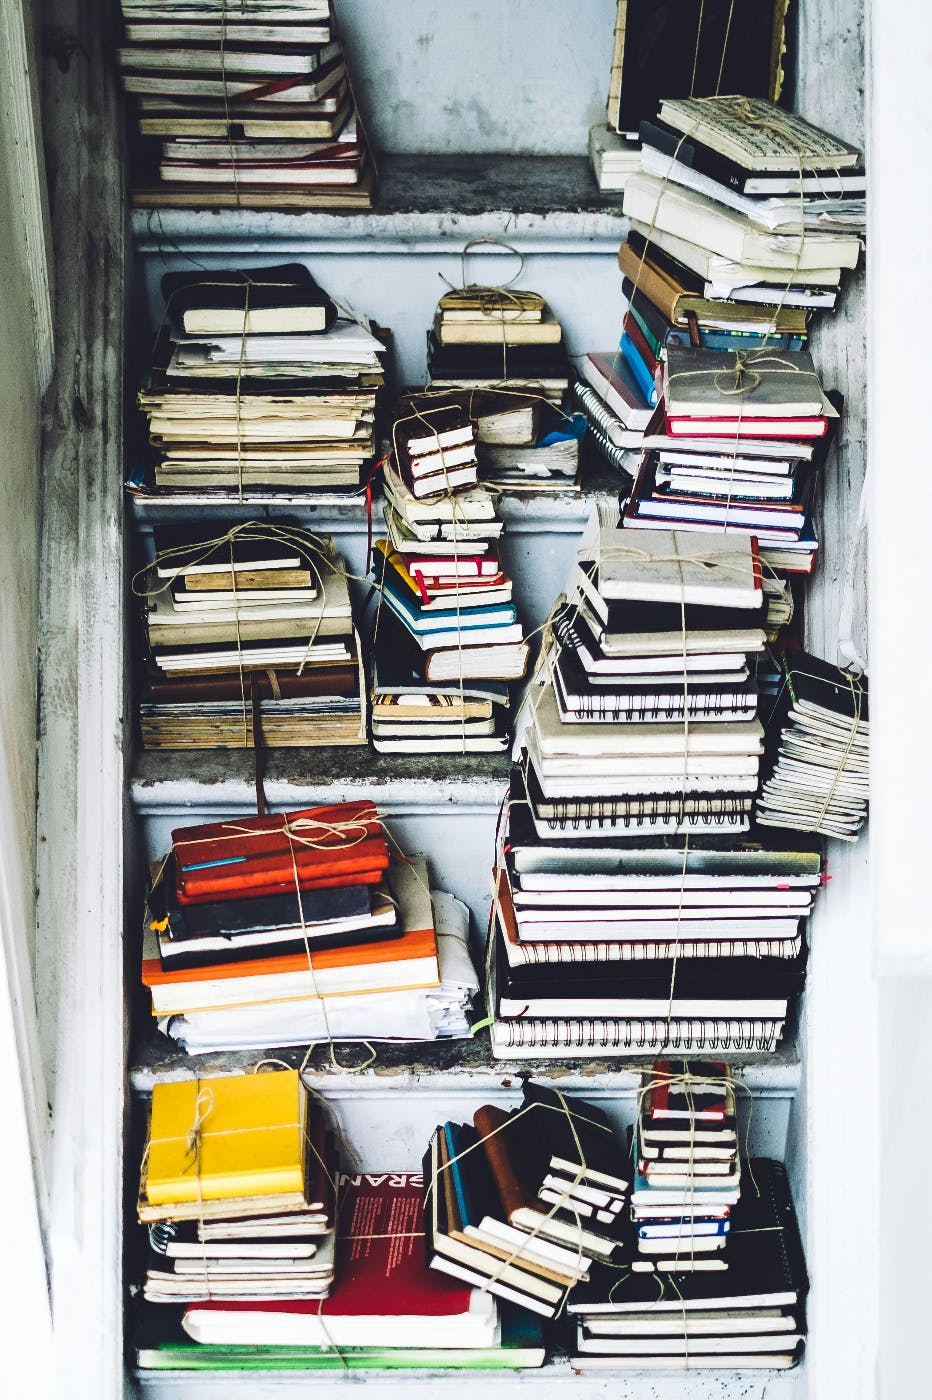 A closet full of journals tied in bundles